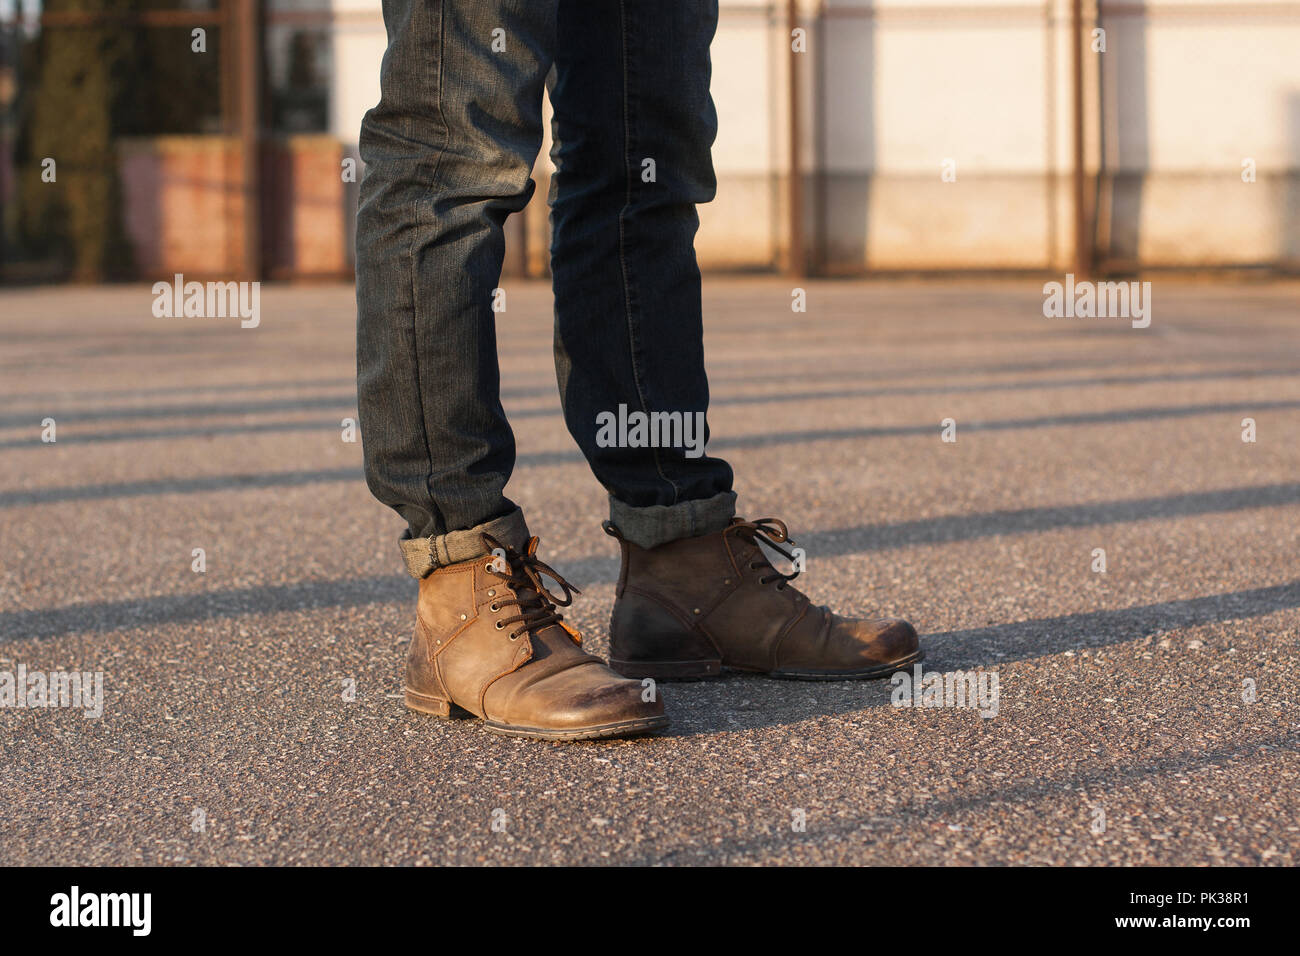 Men's legs with jeans and boots. at Stock Photo -